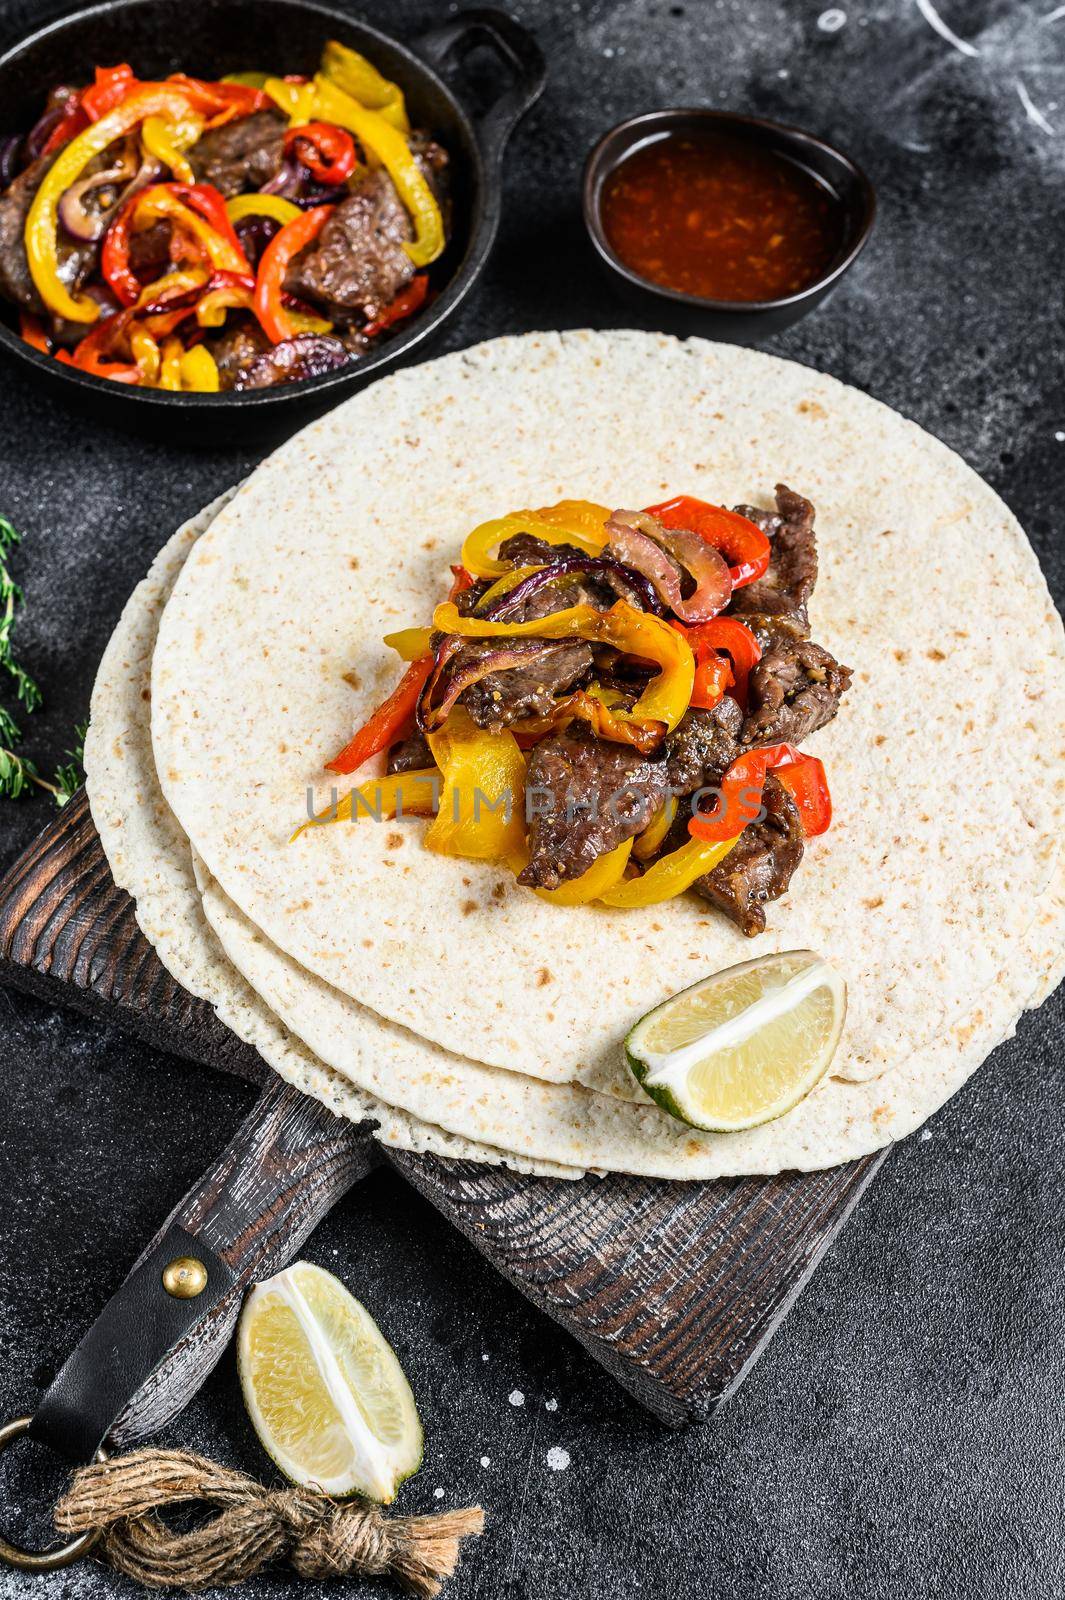 Beef Steak Fajitas with tortilla, mix pepper and onion traditional Mexican food. Black background. Top view by Composter